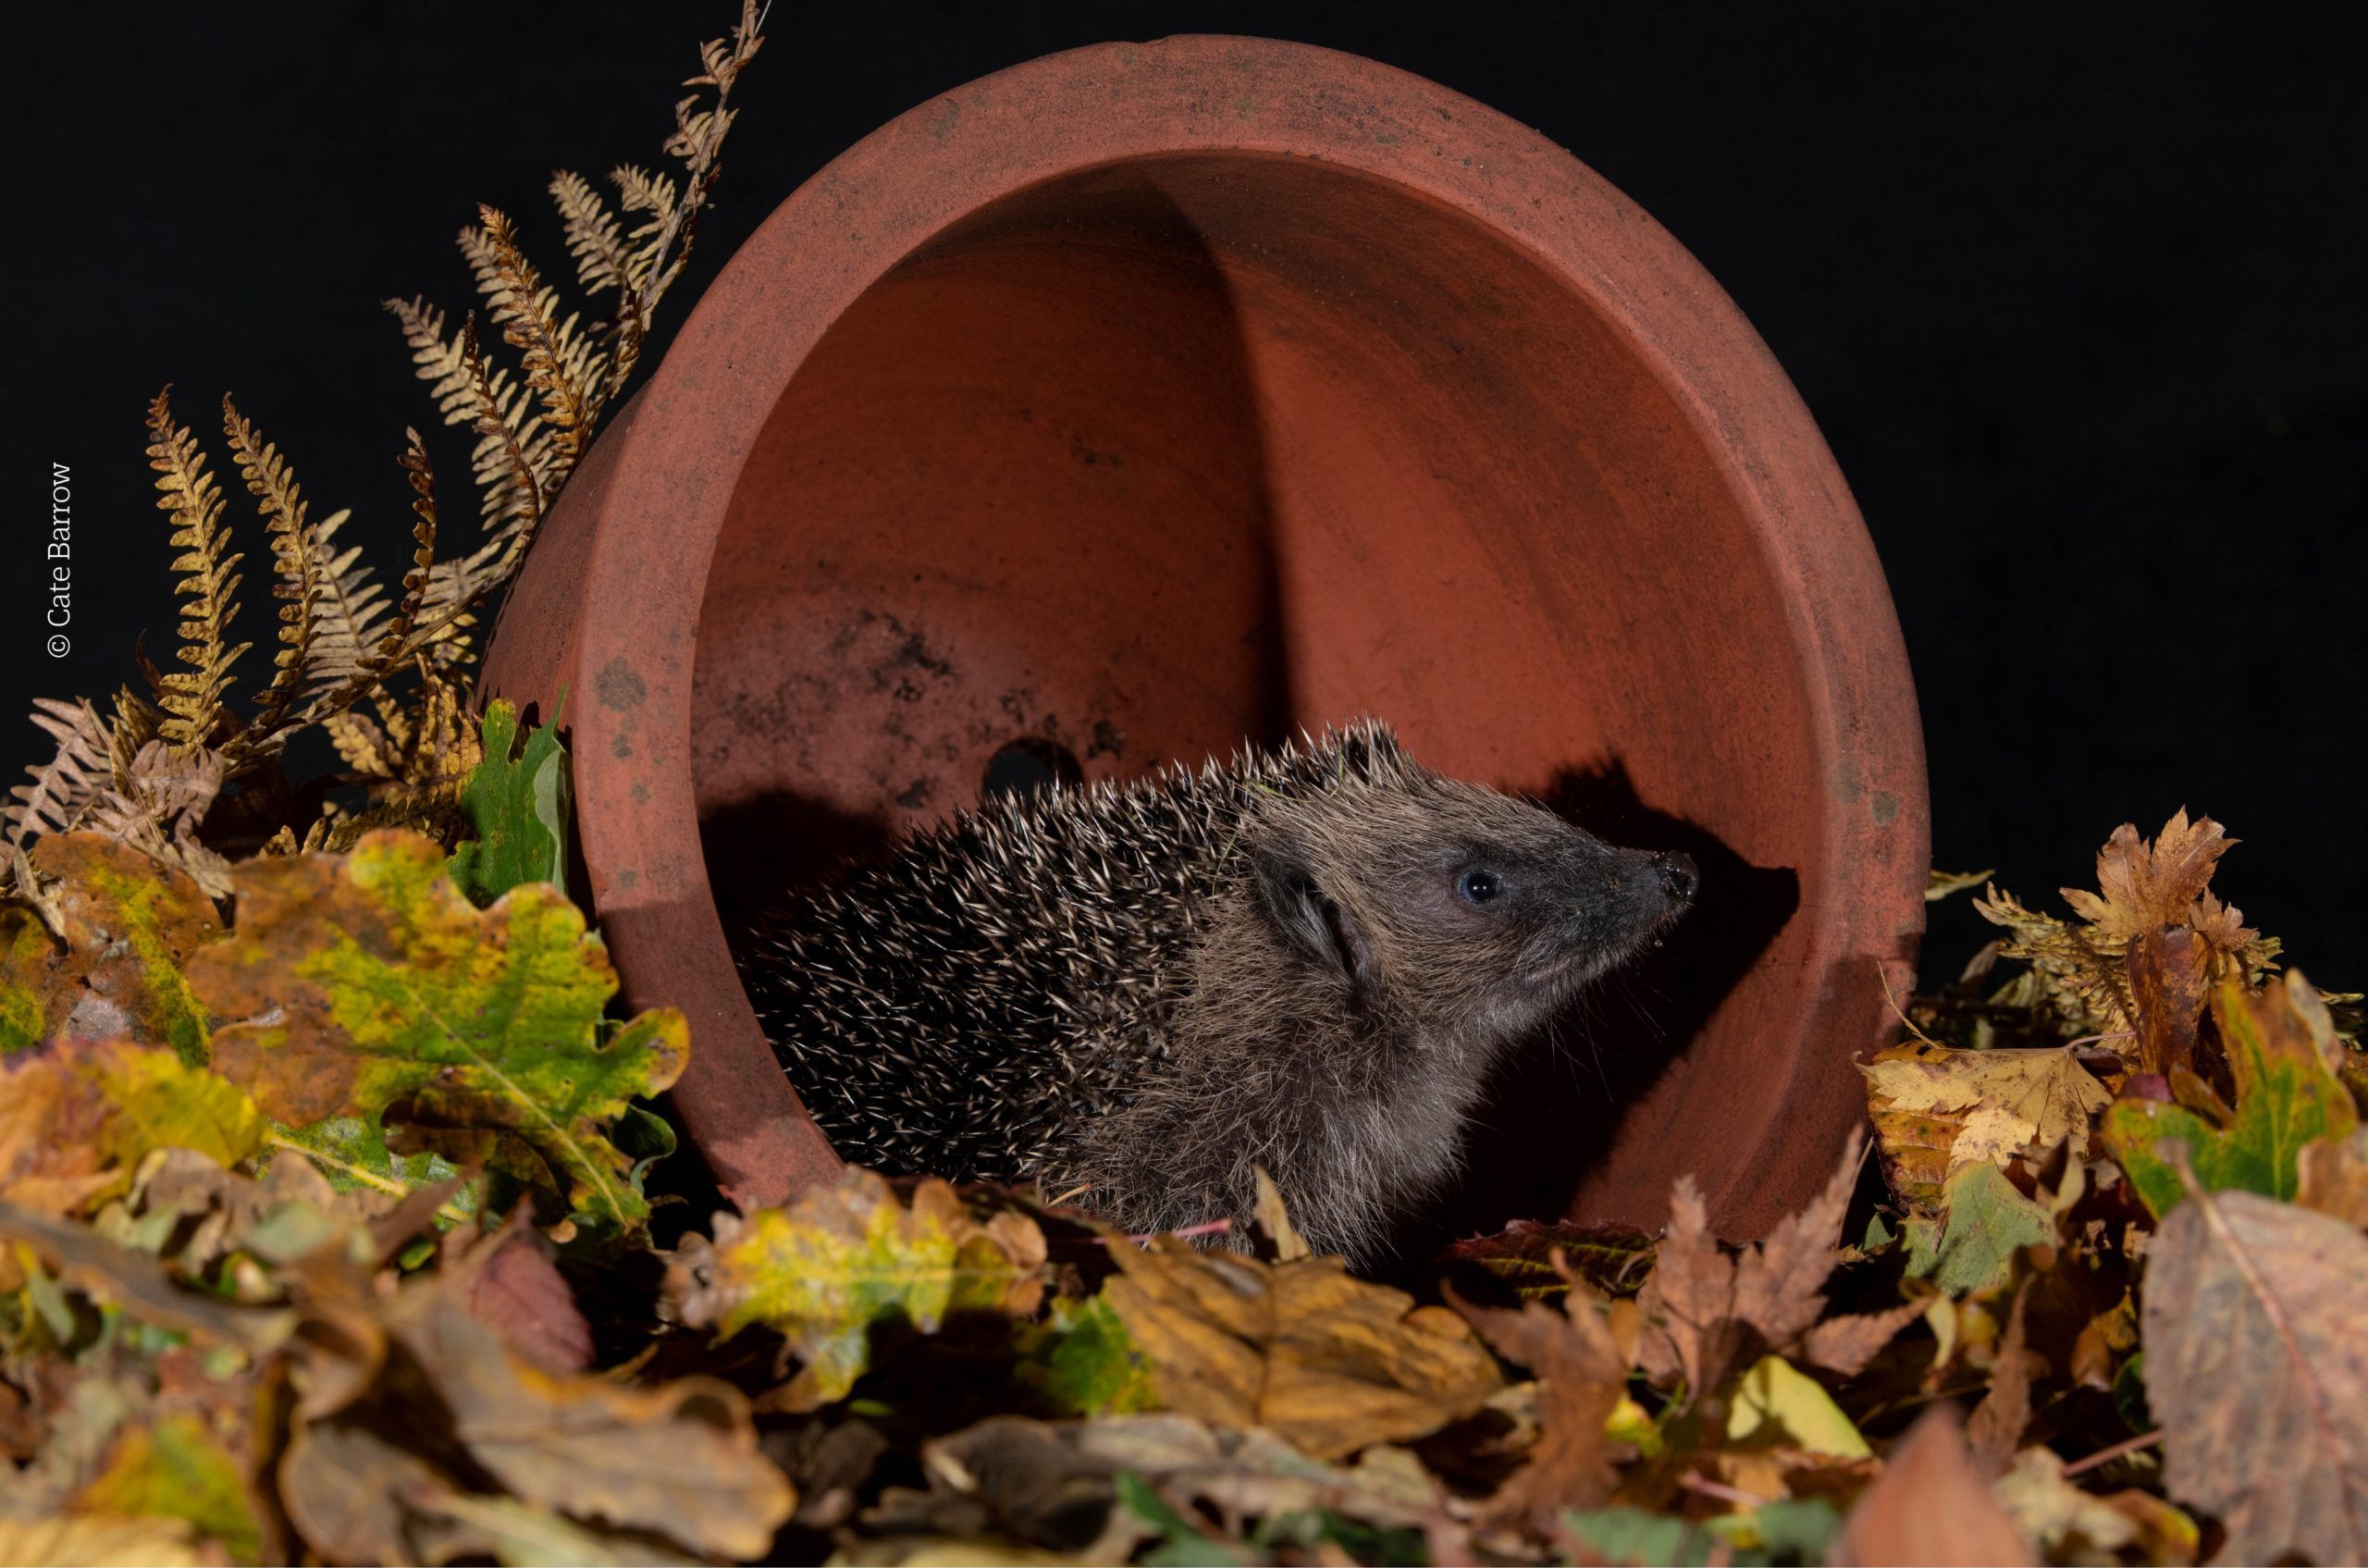 Hedgehog in a planter by Cate Barrow